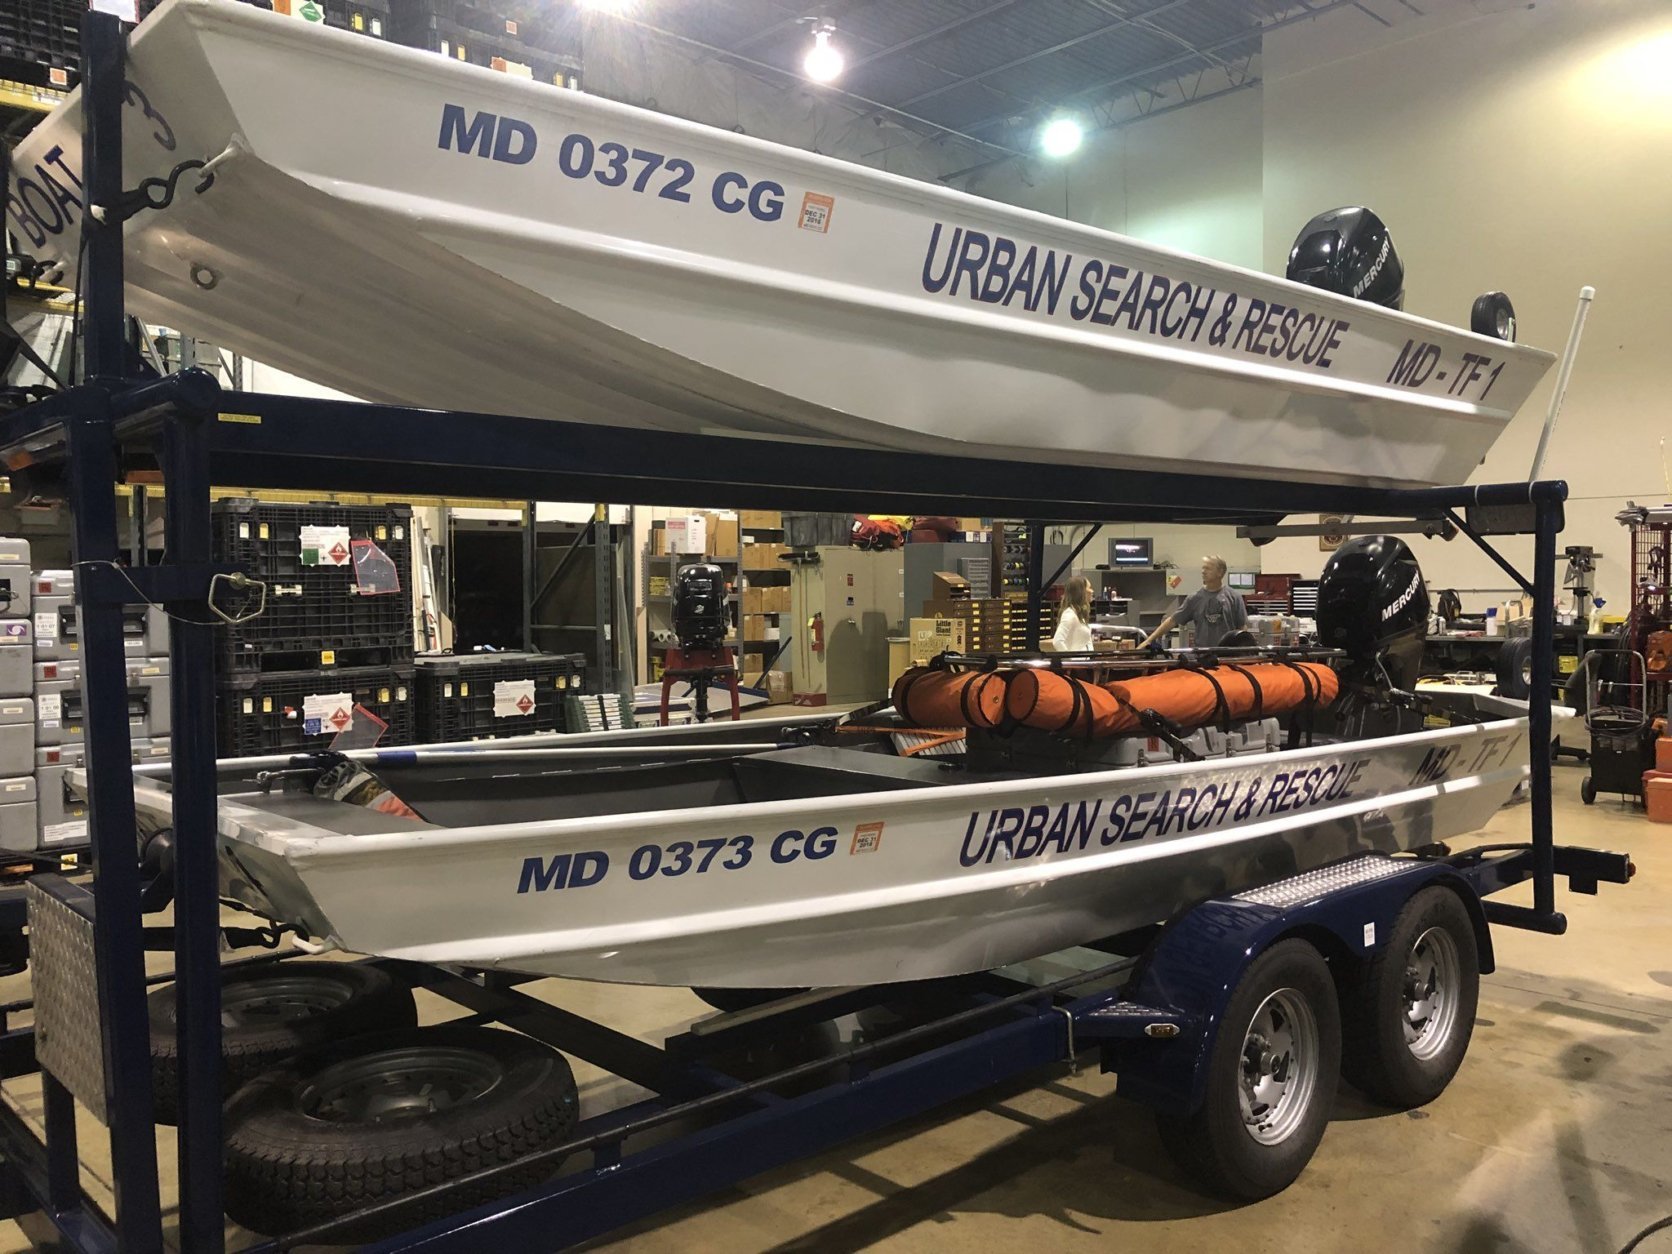 Maryland's search and rescue technicians took with them a number of boat and light support vehicles designed for rescues in both still and flowing floodwater. (WTOP/Melissa Howell)